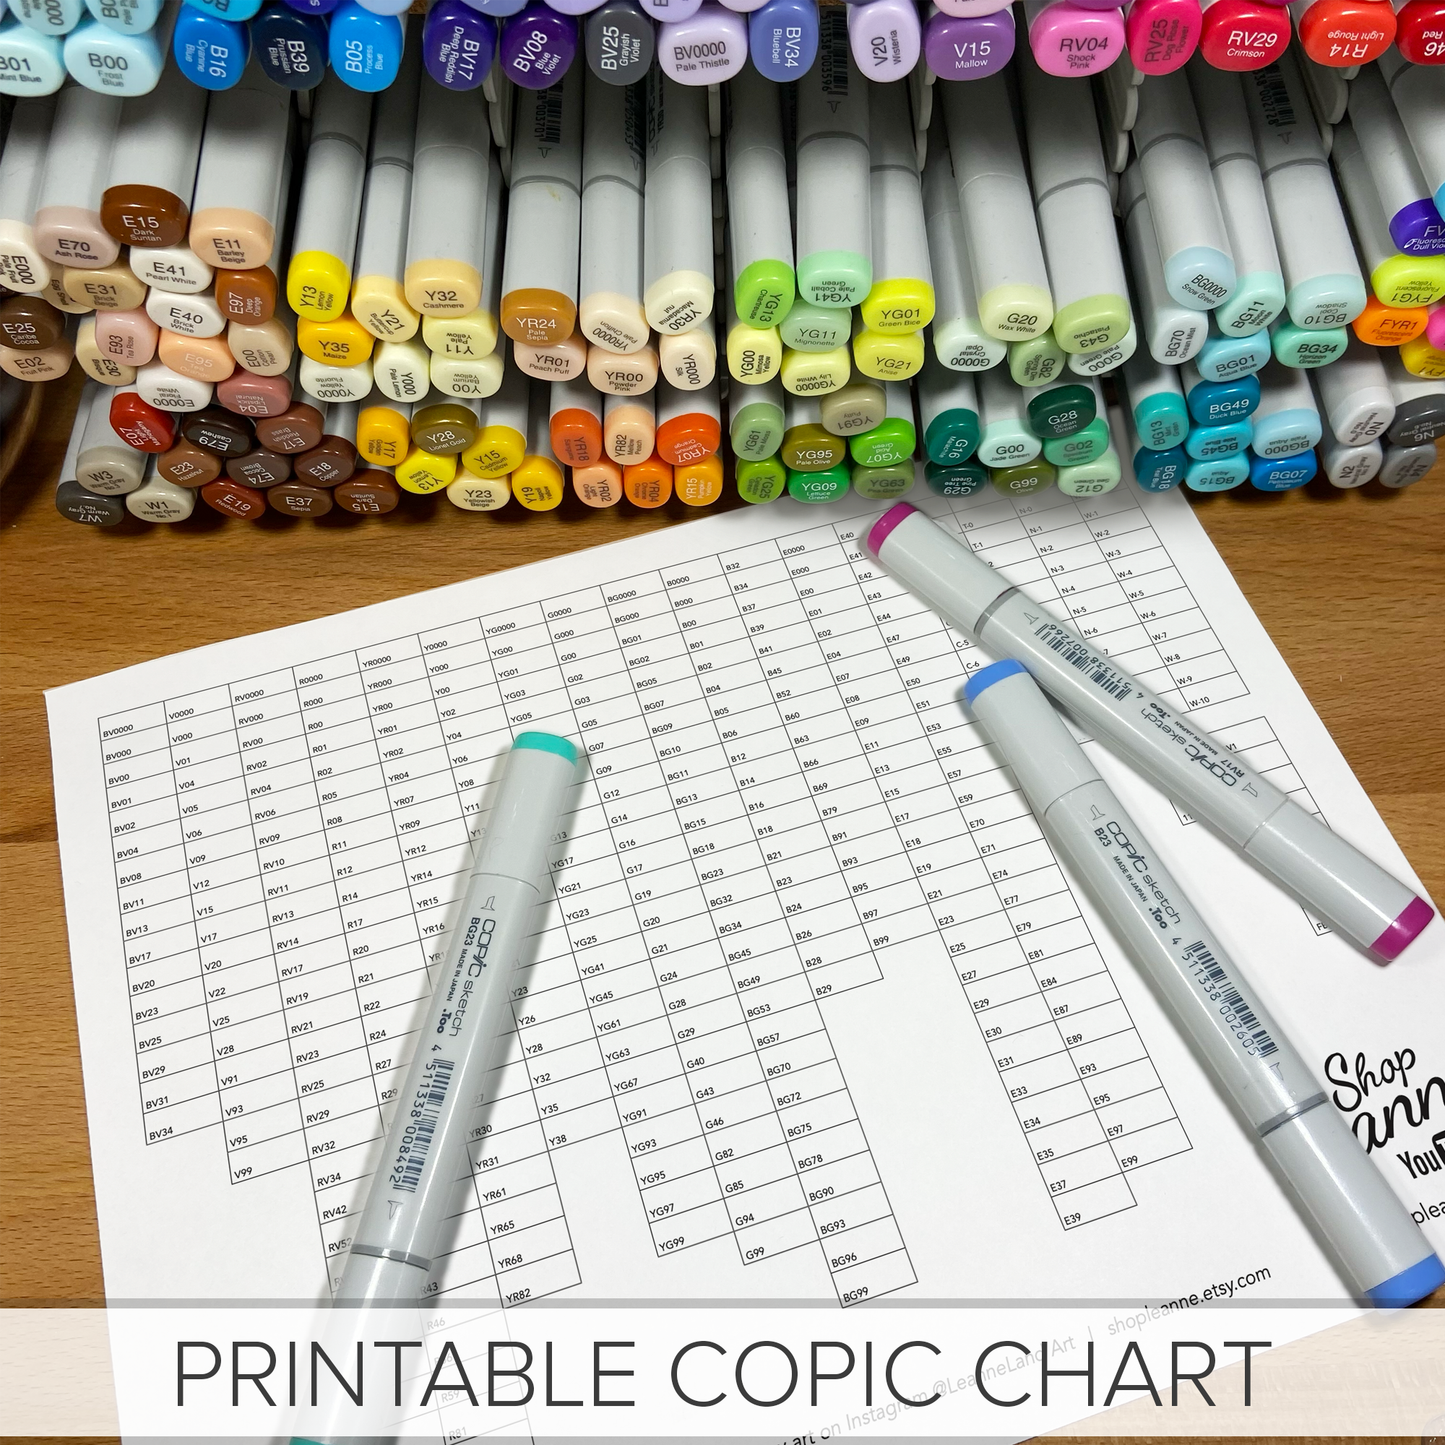 Marker Chart BUNDLE - Copic and PITT Artist Brush Pens - 2 in 1